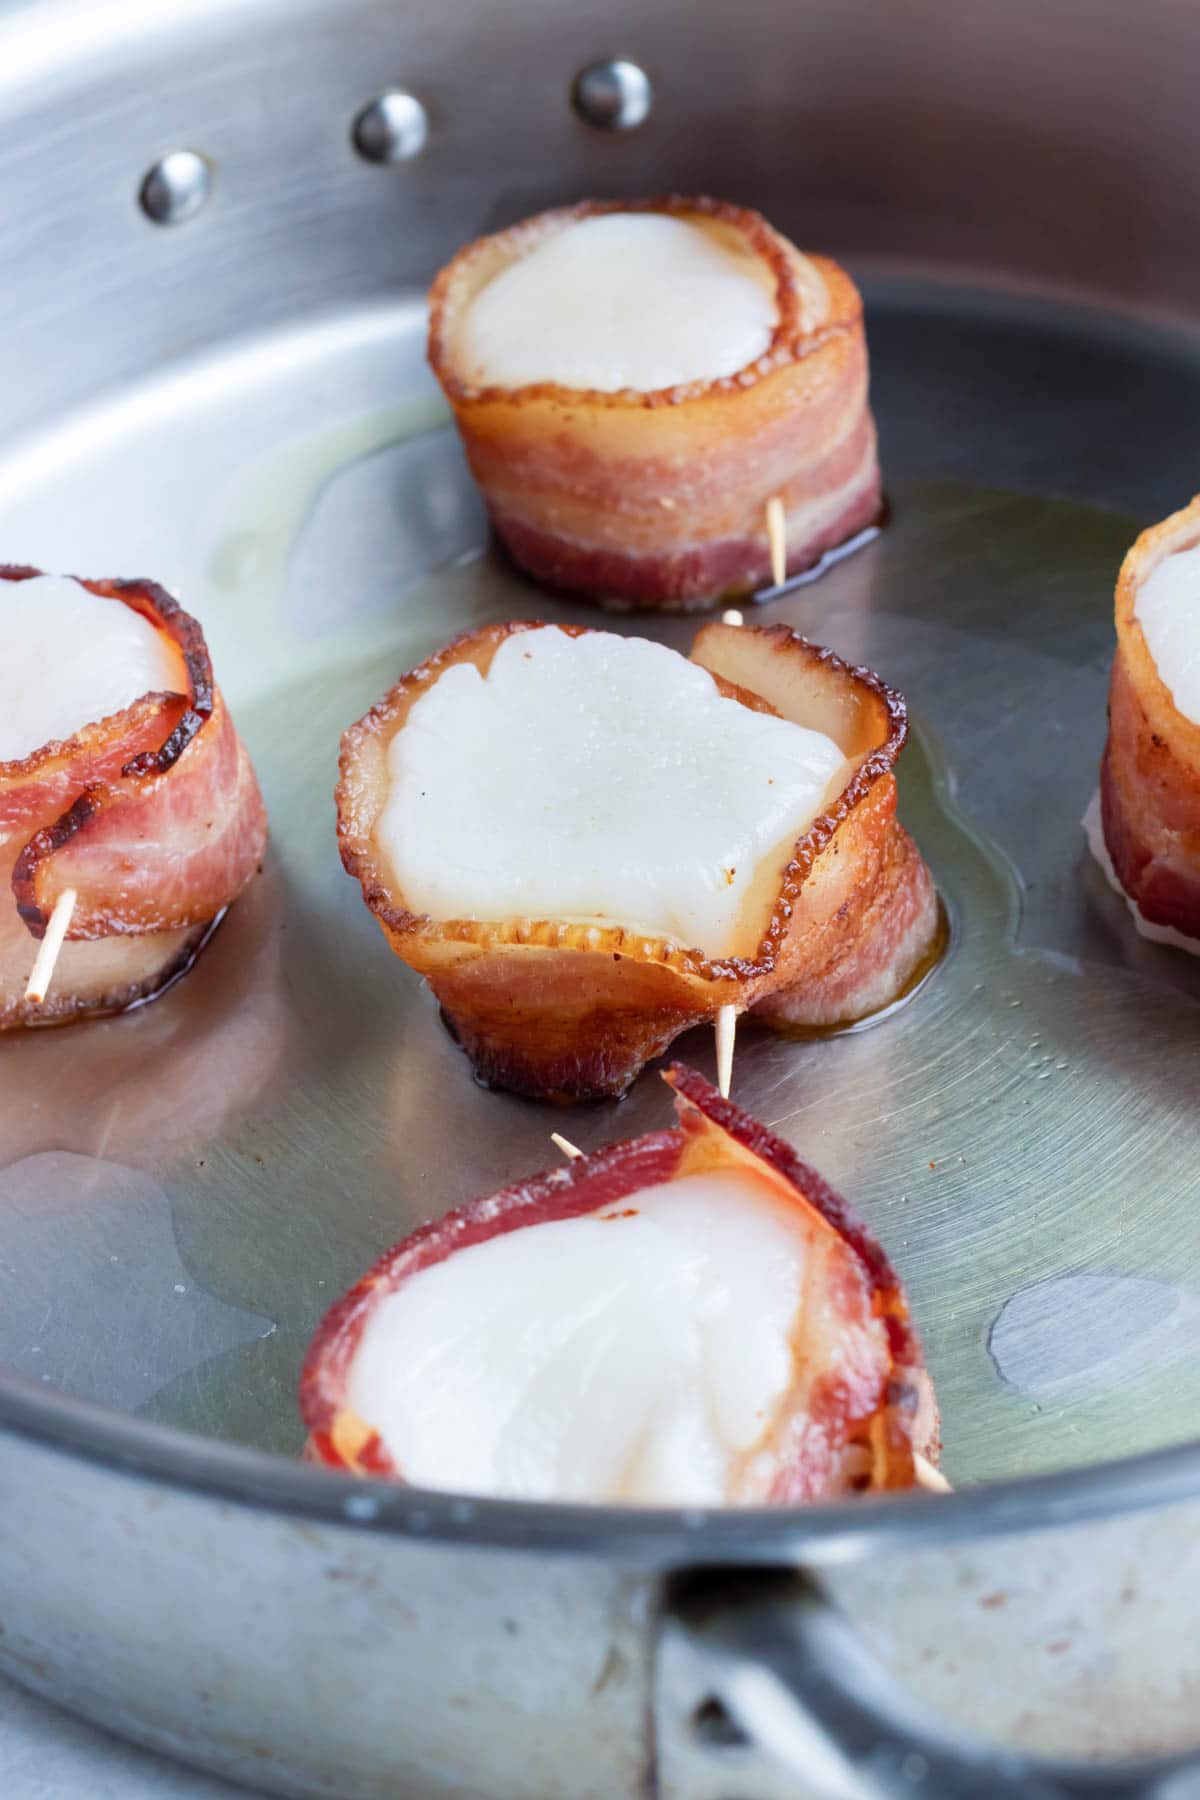 Bacon wrapped scallops being cooked in a skillet.